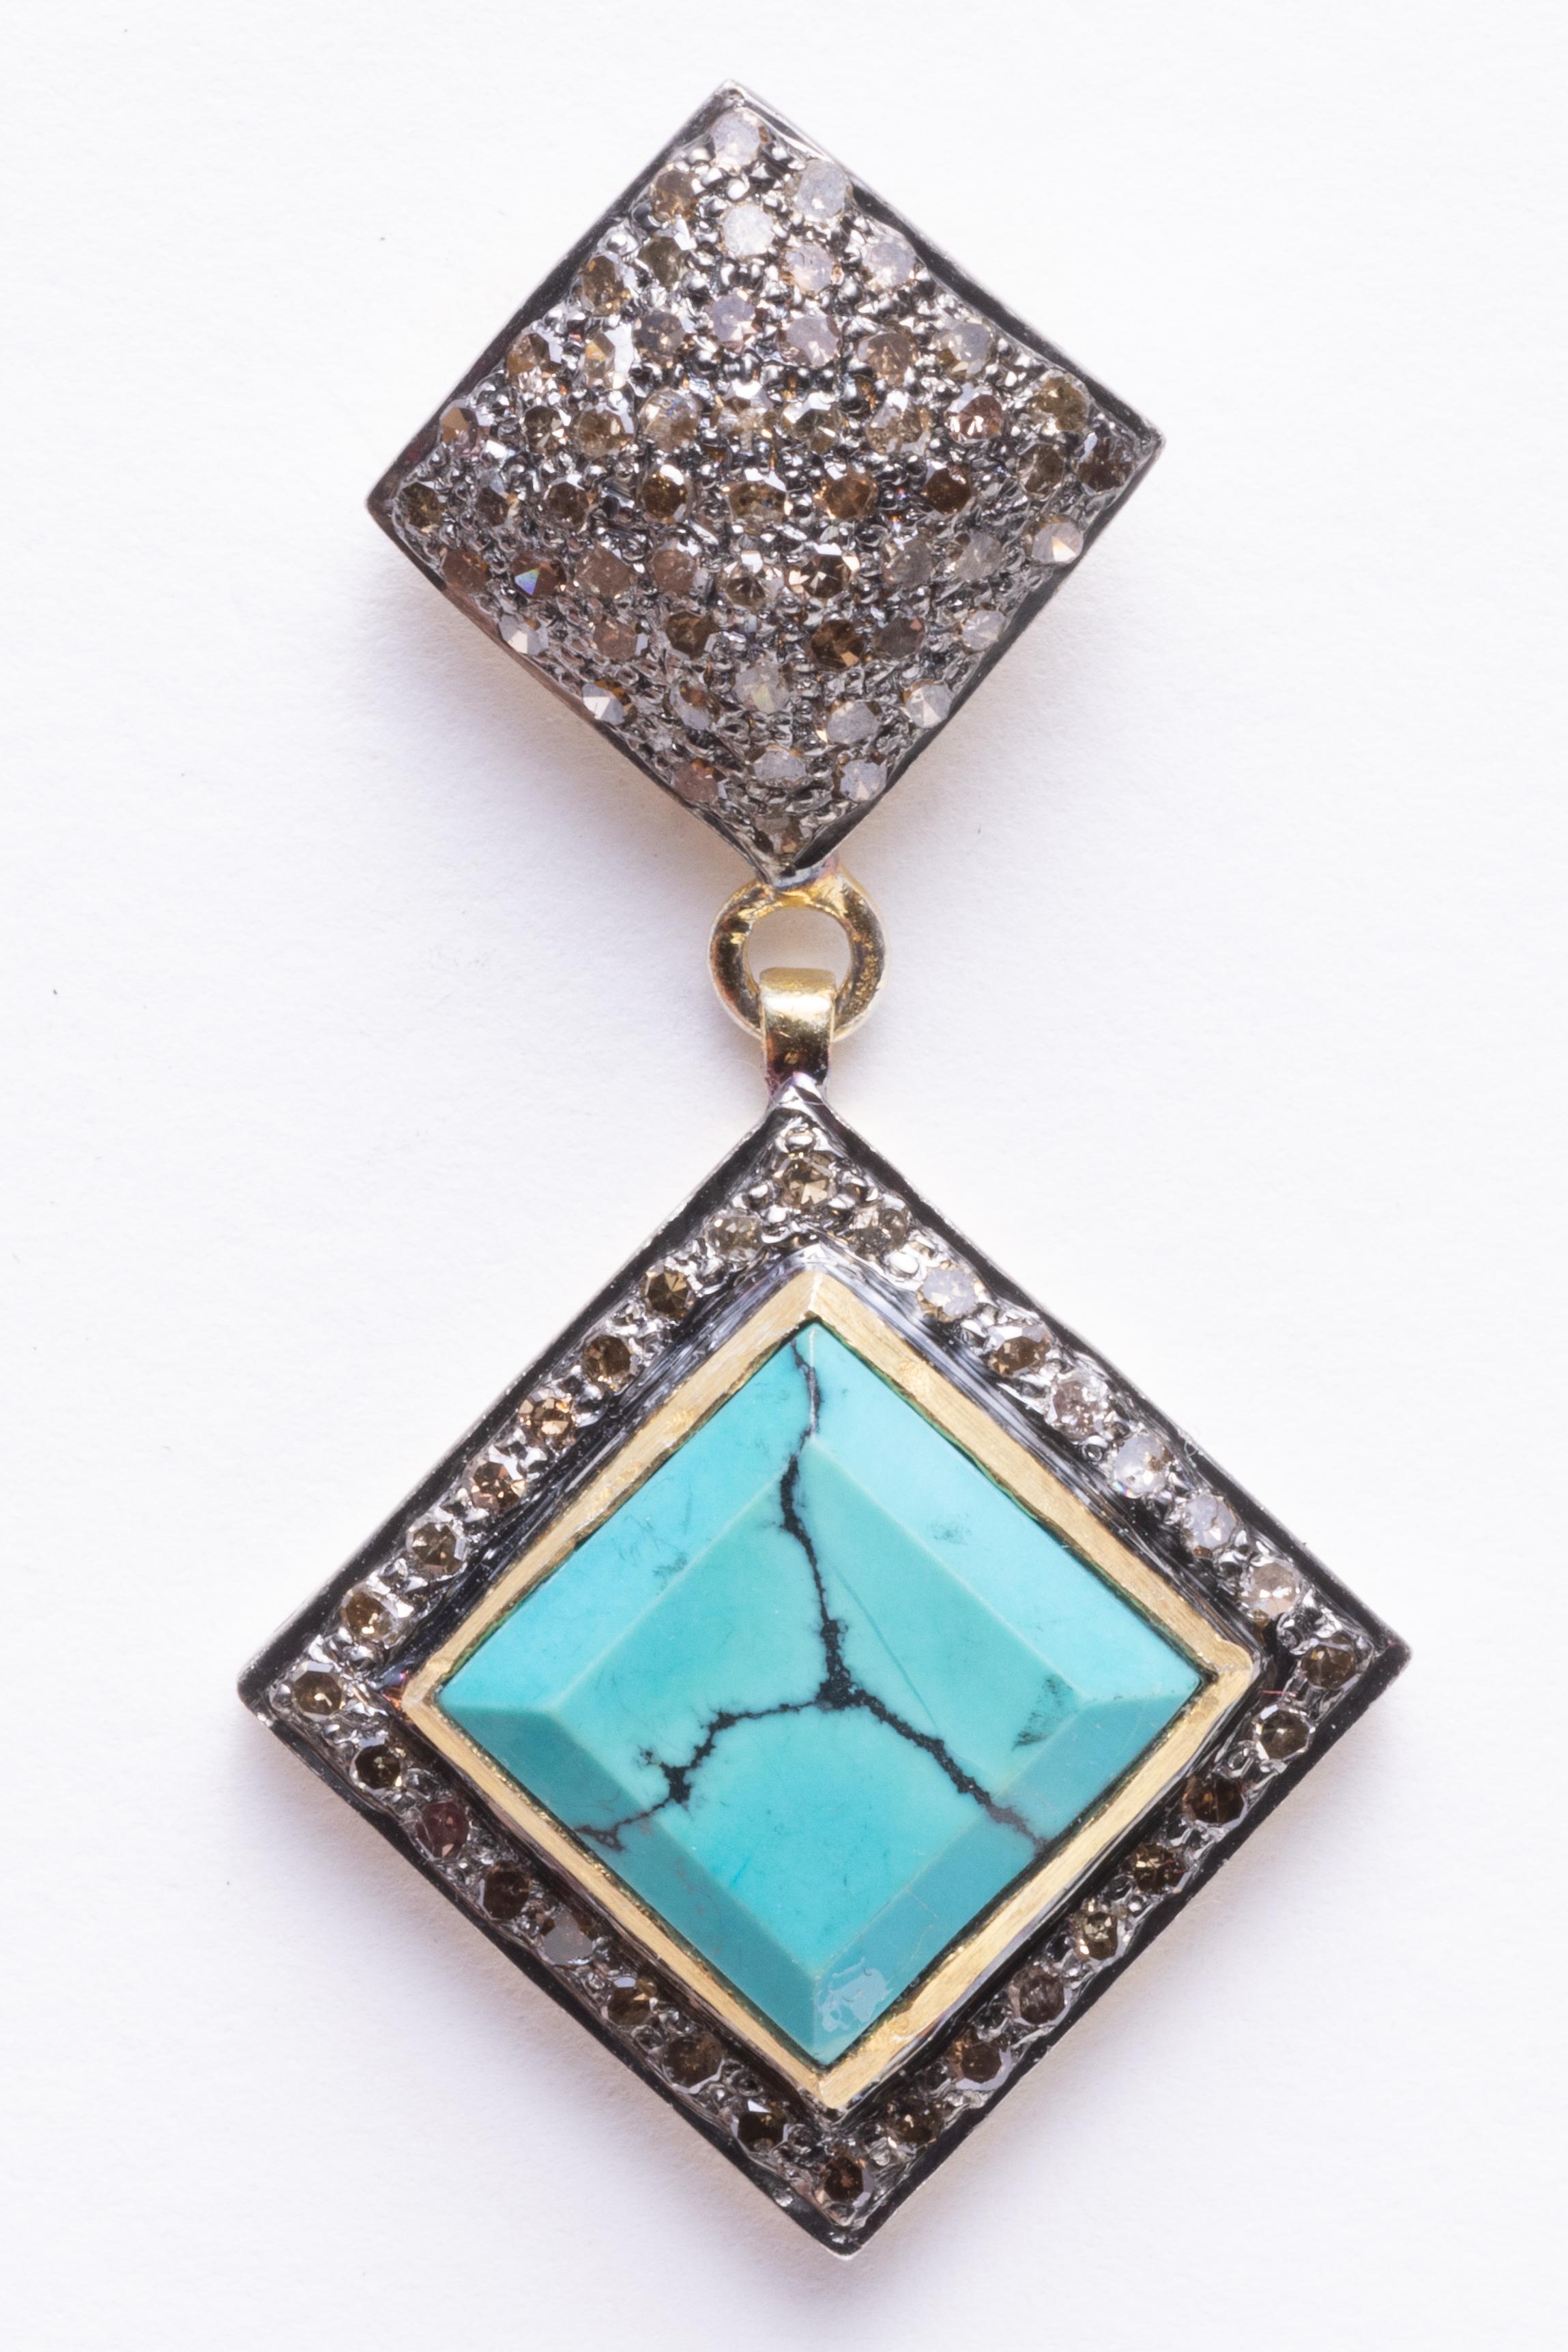 Pave` set diamonds adorn the post of these drop earrings and also border the beveled square turquoise stones set on the diagonal.  The turquoise is American with a nice matrix to it.  Carat weight of diamonds total 1.75 carats and the turquoise